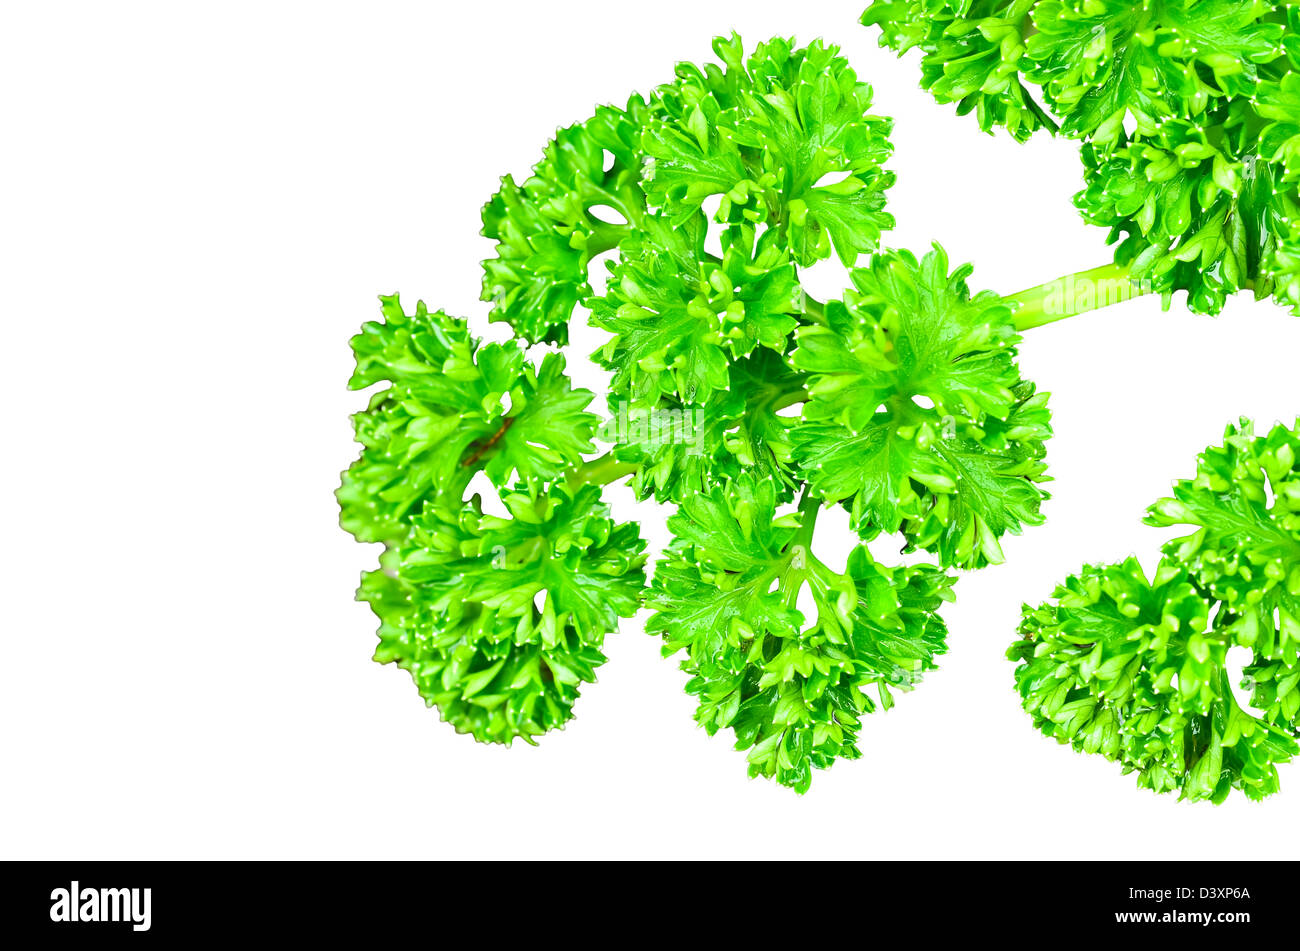 Bay leaf parsley in white background. Stock Photo